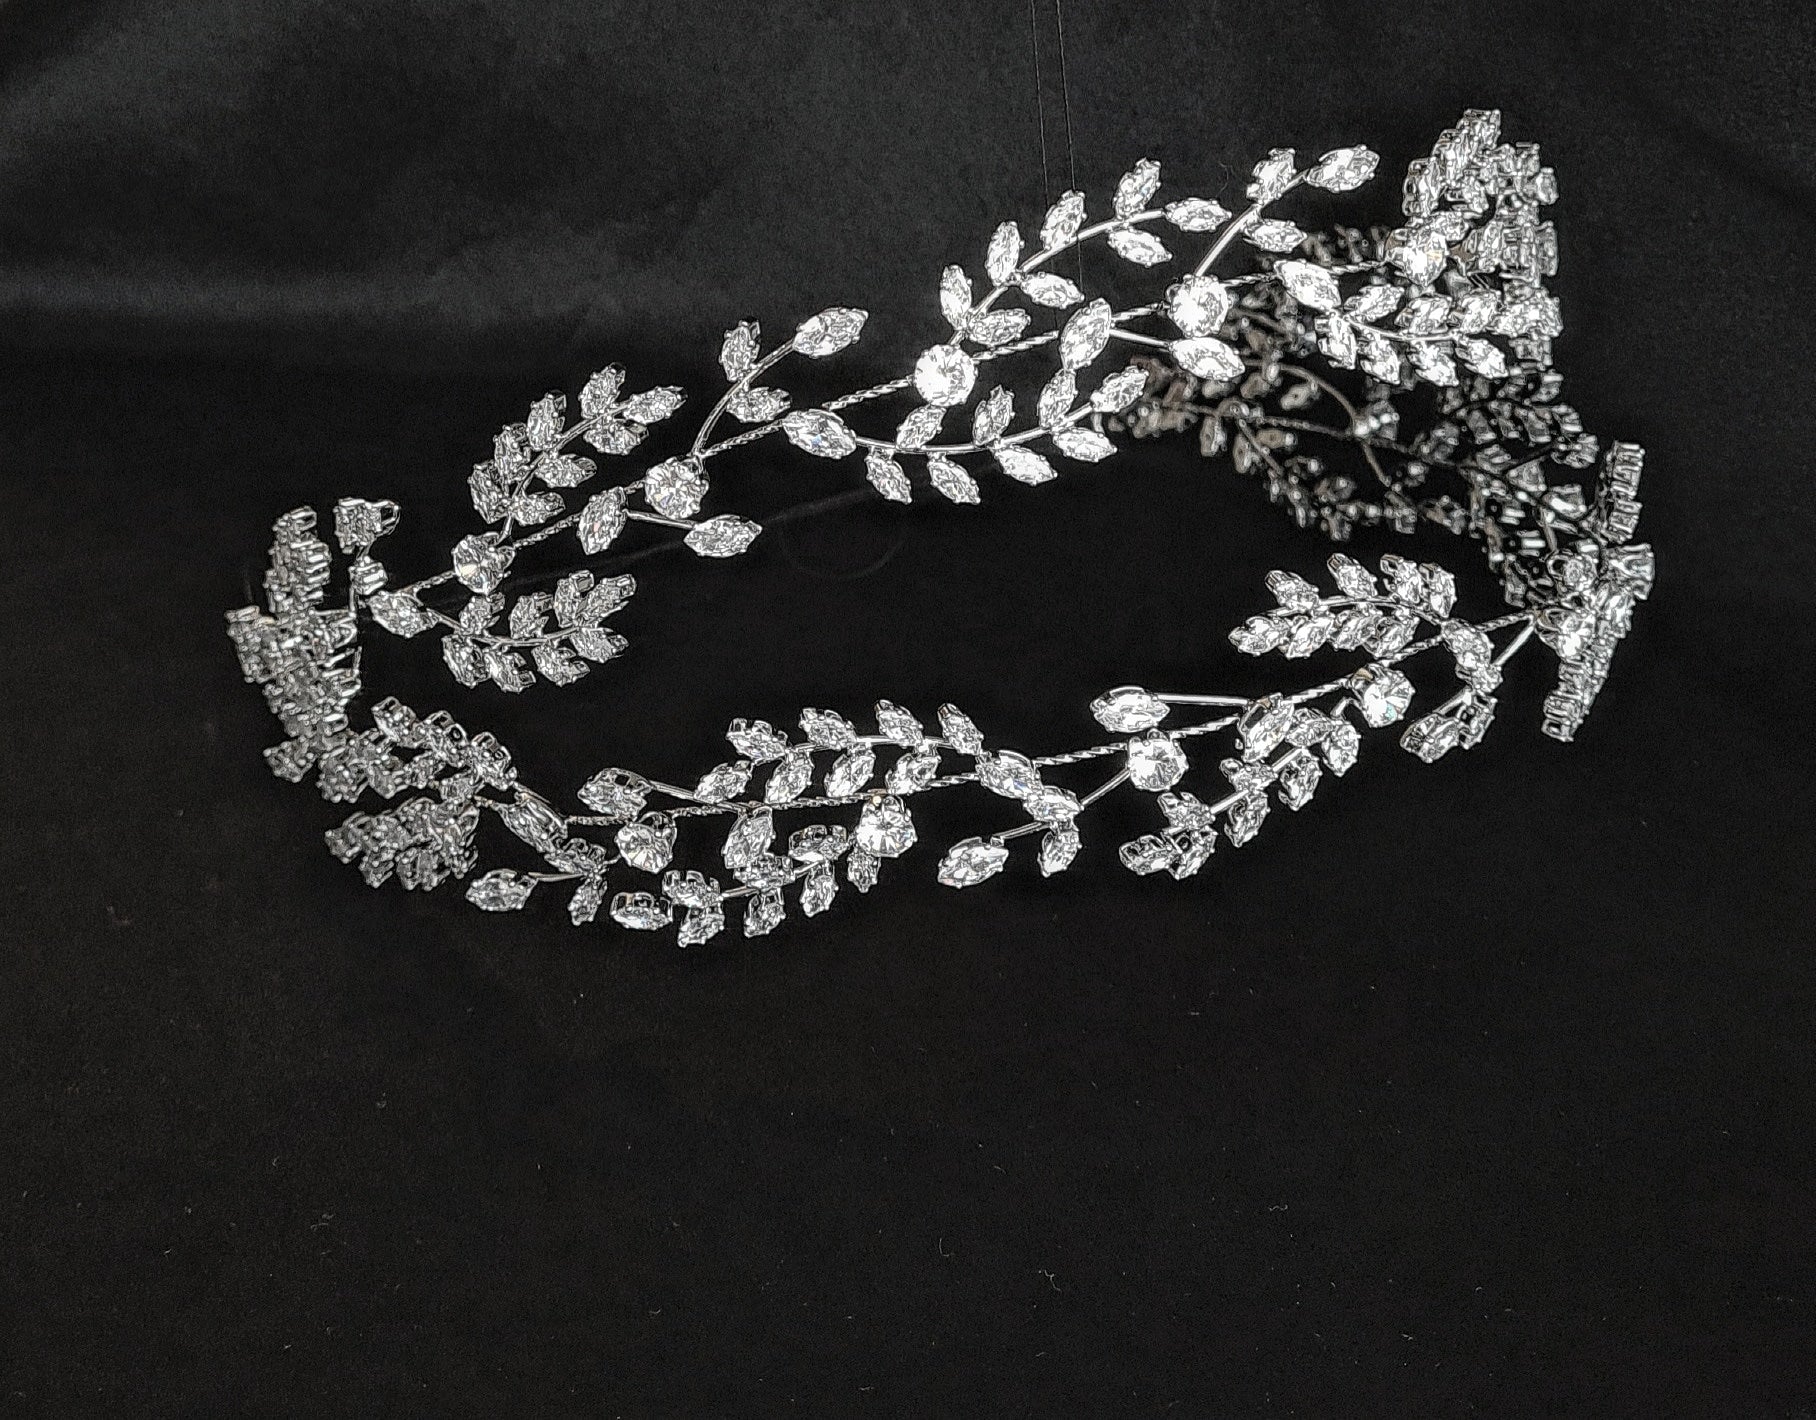 a bridal hairpiece with double rows of cubic zirconia on a black background. The hairpiece is made of cubic zirconia and has a delicate, feminine design. It is perfect for a bride who wants to add a touch of elegance to her wedding day look. The hairpiece is shown on a black background, so the cubic zirconia stands out beautifully